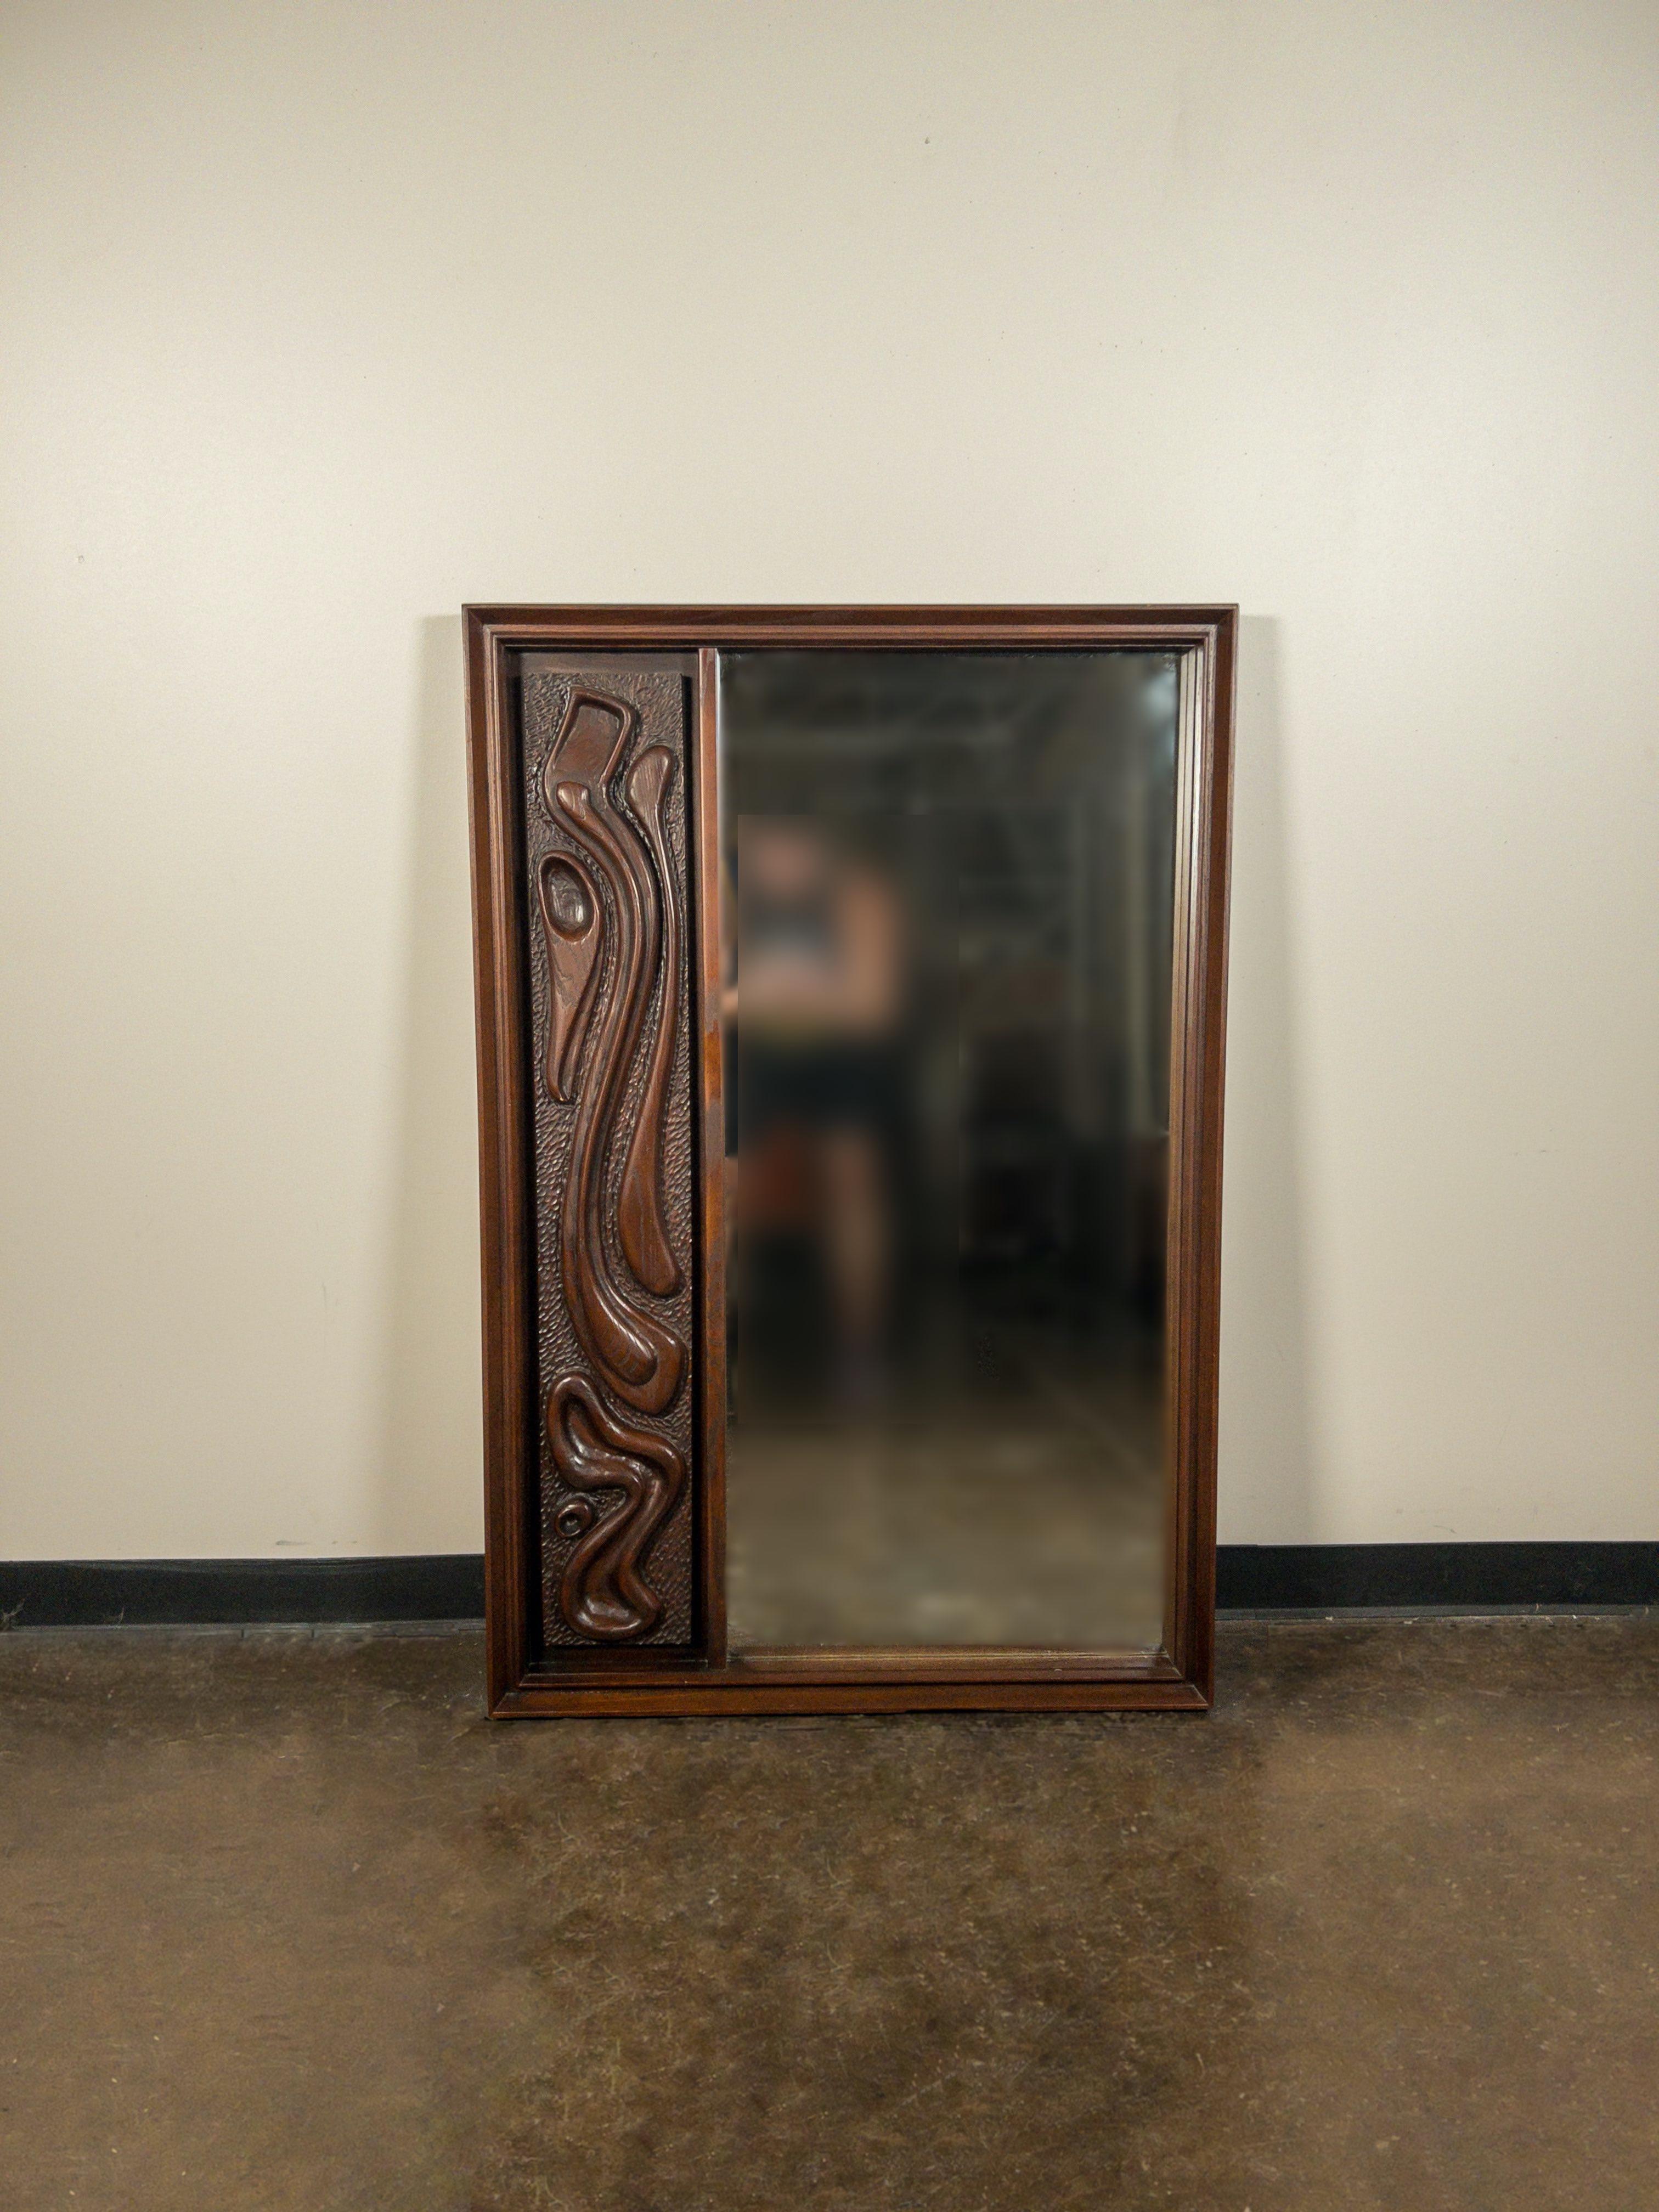 This fantastic lacquered sculpted walnut 'Oceanic' wall mirror by Pulaski Furniture Corporation, circa 1969 which perfectly encapsulates the California surf mentality of the 1960s and 1970s, making this piece a highly sought after design by Tiki